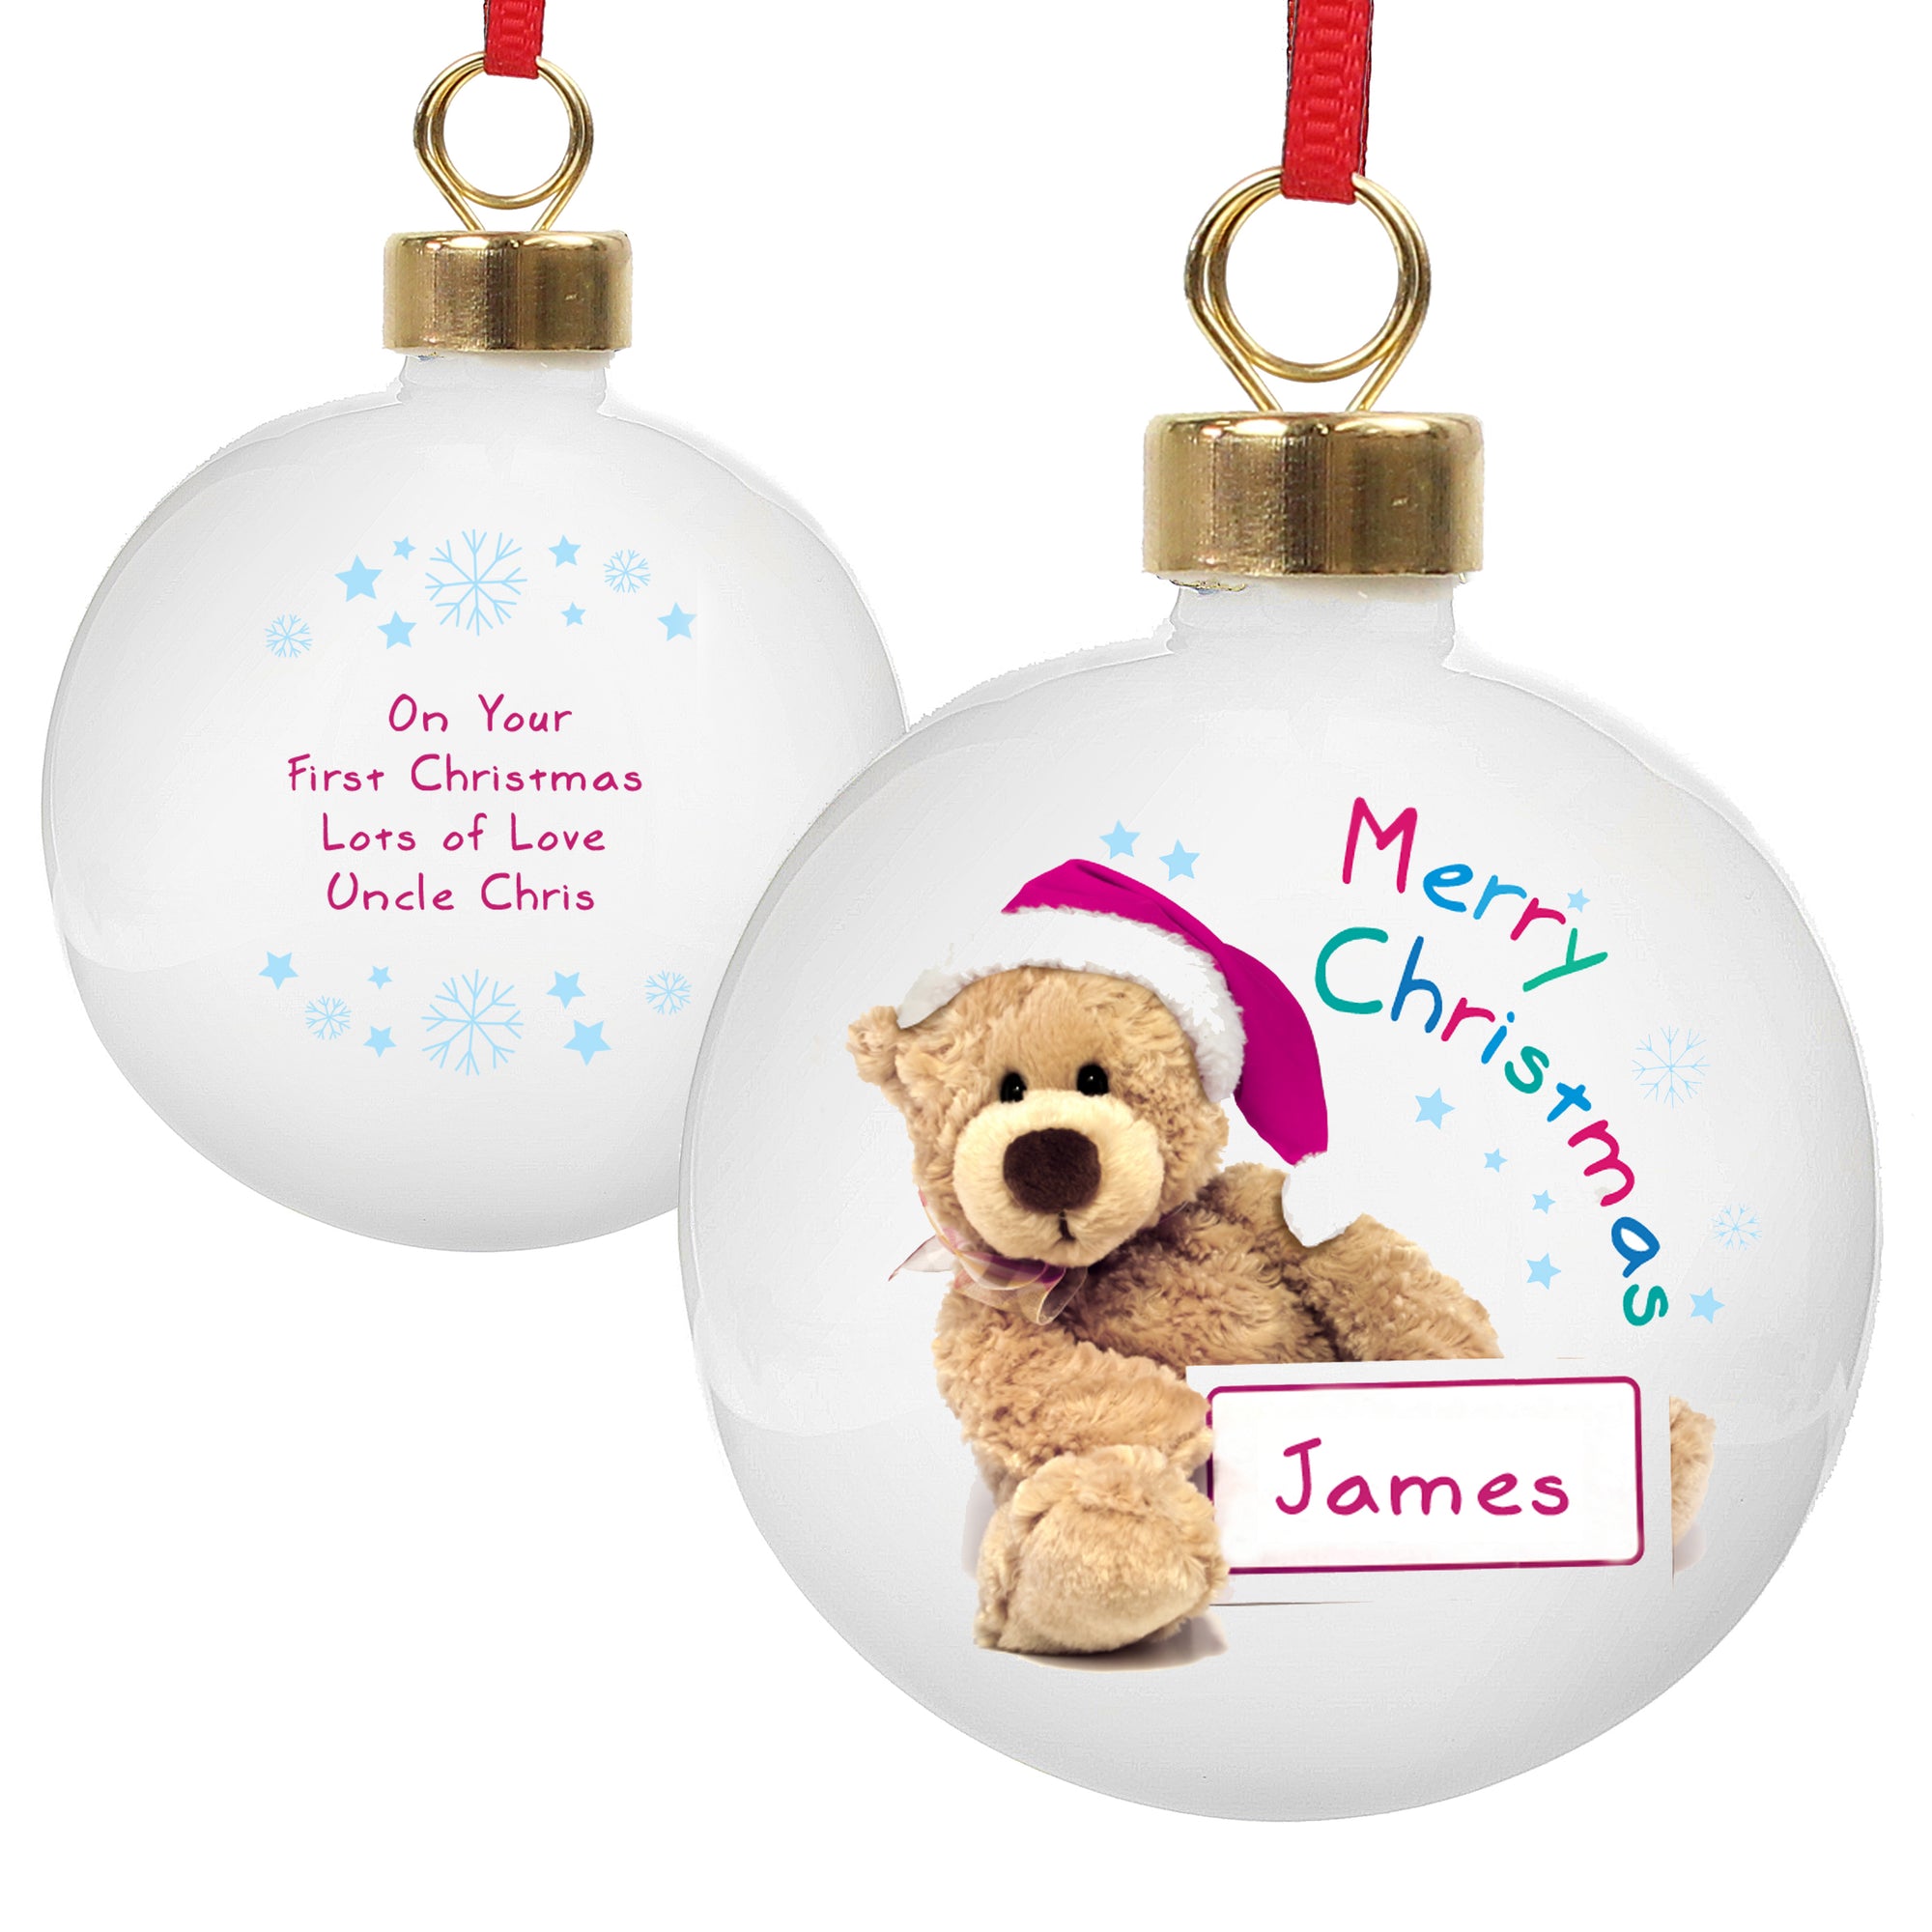 Personalised Christmas tree decoration made from white ceramic, featuring an image of a cute teddy bear on the front holding a sign that can be personalised with a name of your choice. The rear of the bauble can be personalised with your own message over up to 4 lines.